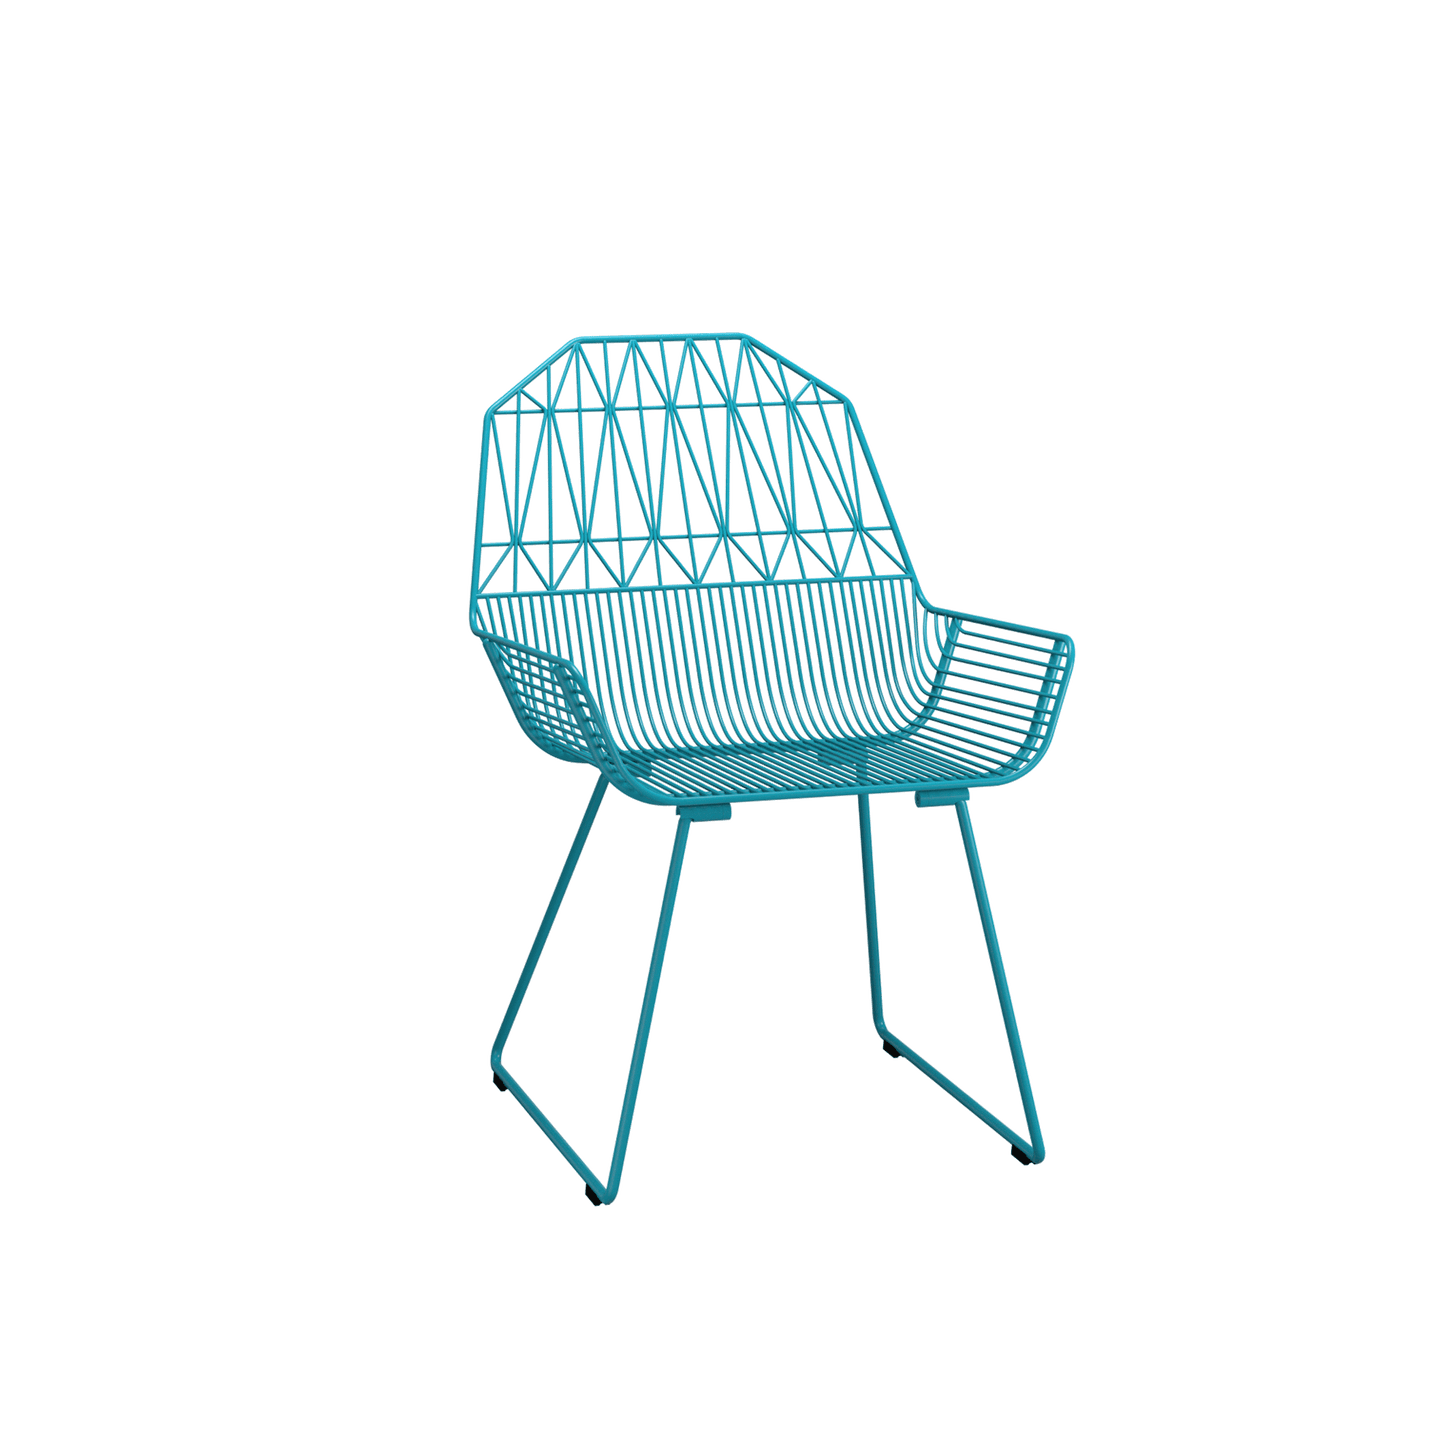 Load image into Gallery viewer, Farmhouse Lounge Peacock BlueLounge Chair Bend Goods  Peacock Blue   Four Hands, Mid Century Modern Furniture, Old Bones Furniture Company, Old Bones Co, Modern Mid Century, Designer Furniture, https://www.oldbonesco.com/
